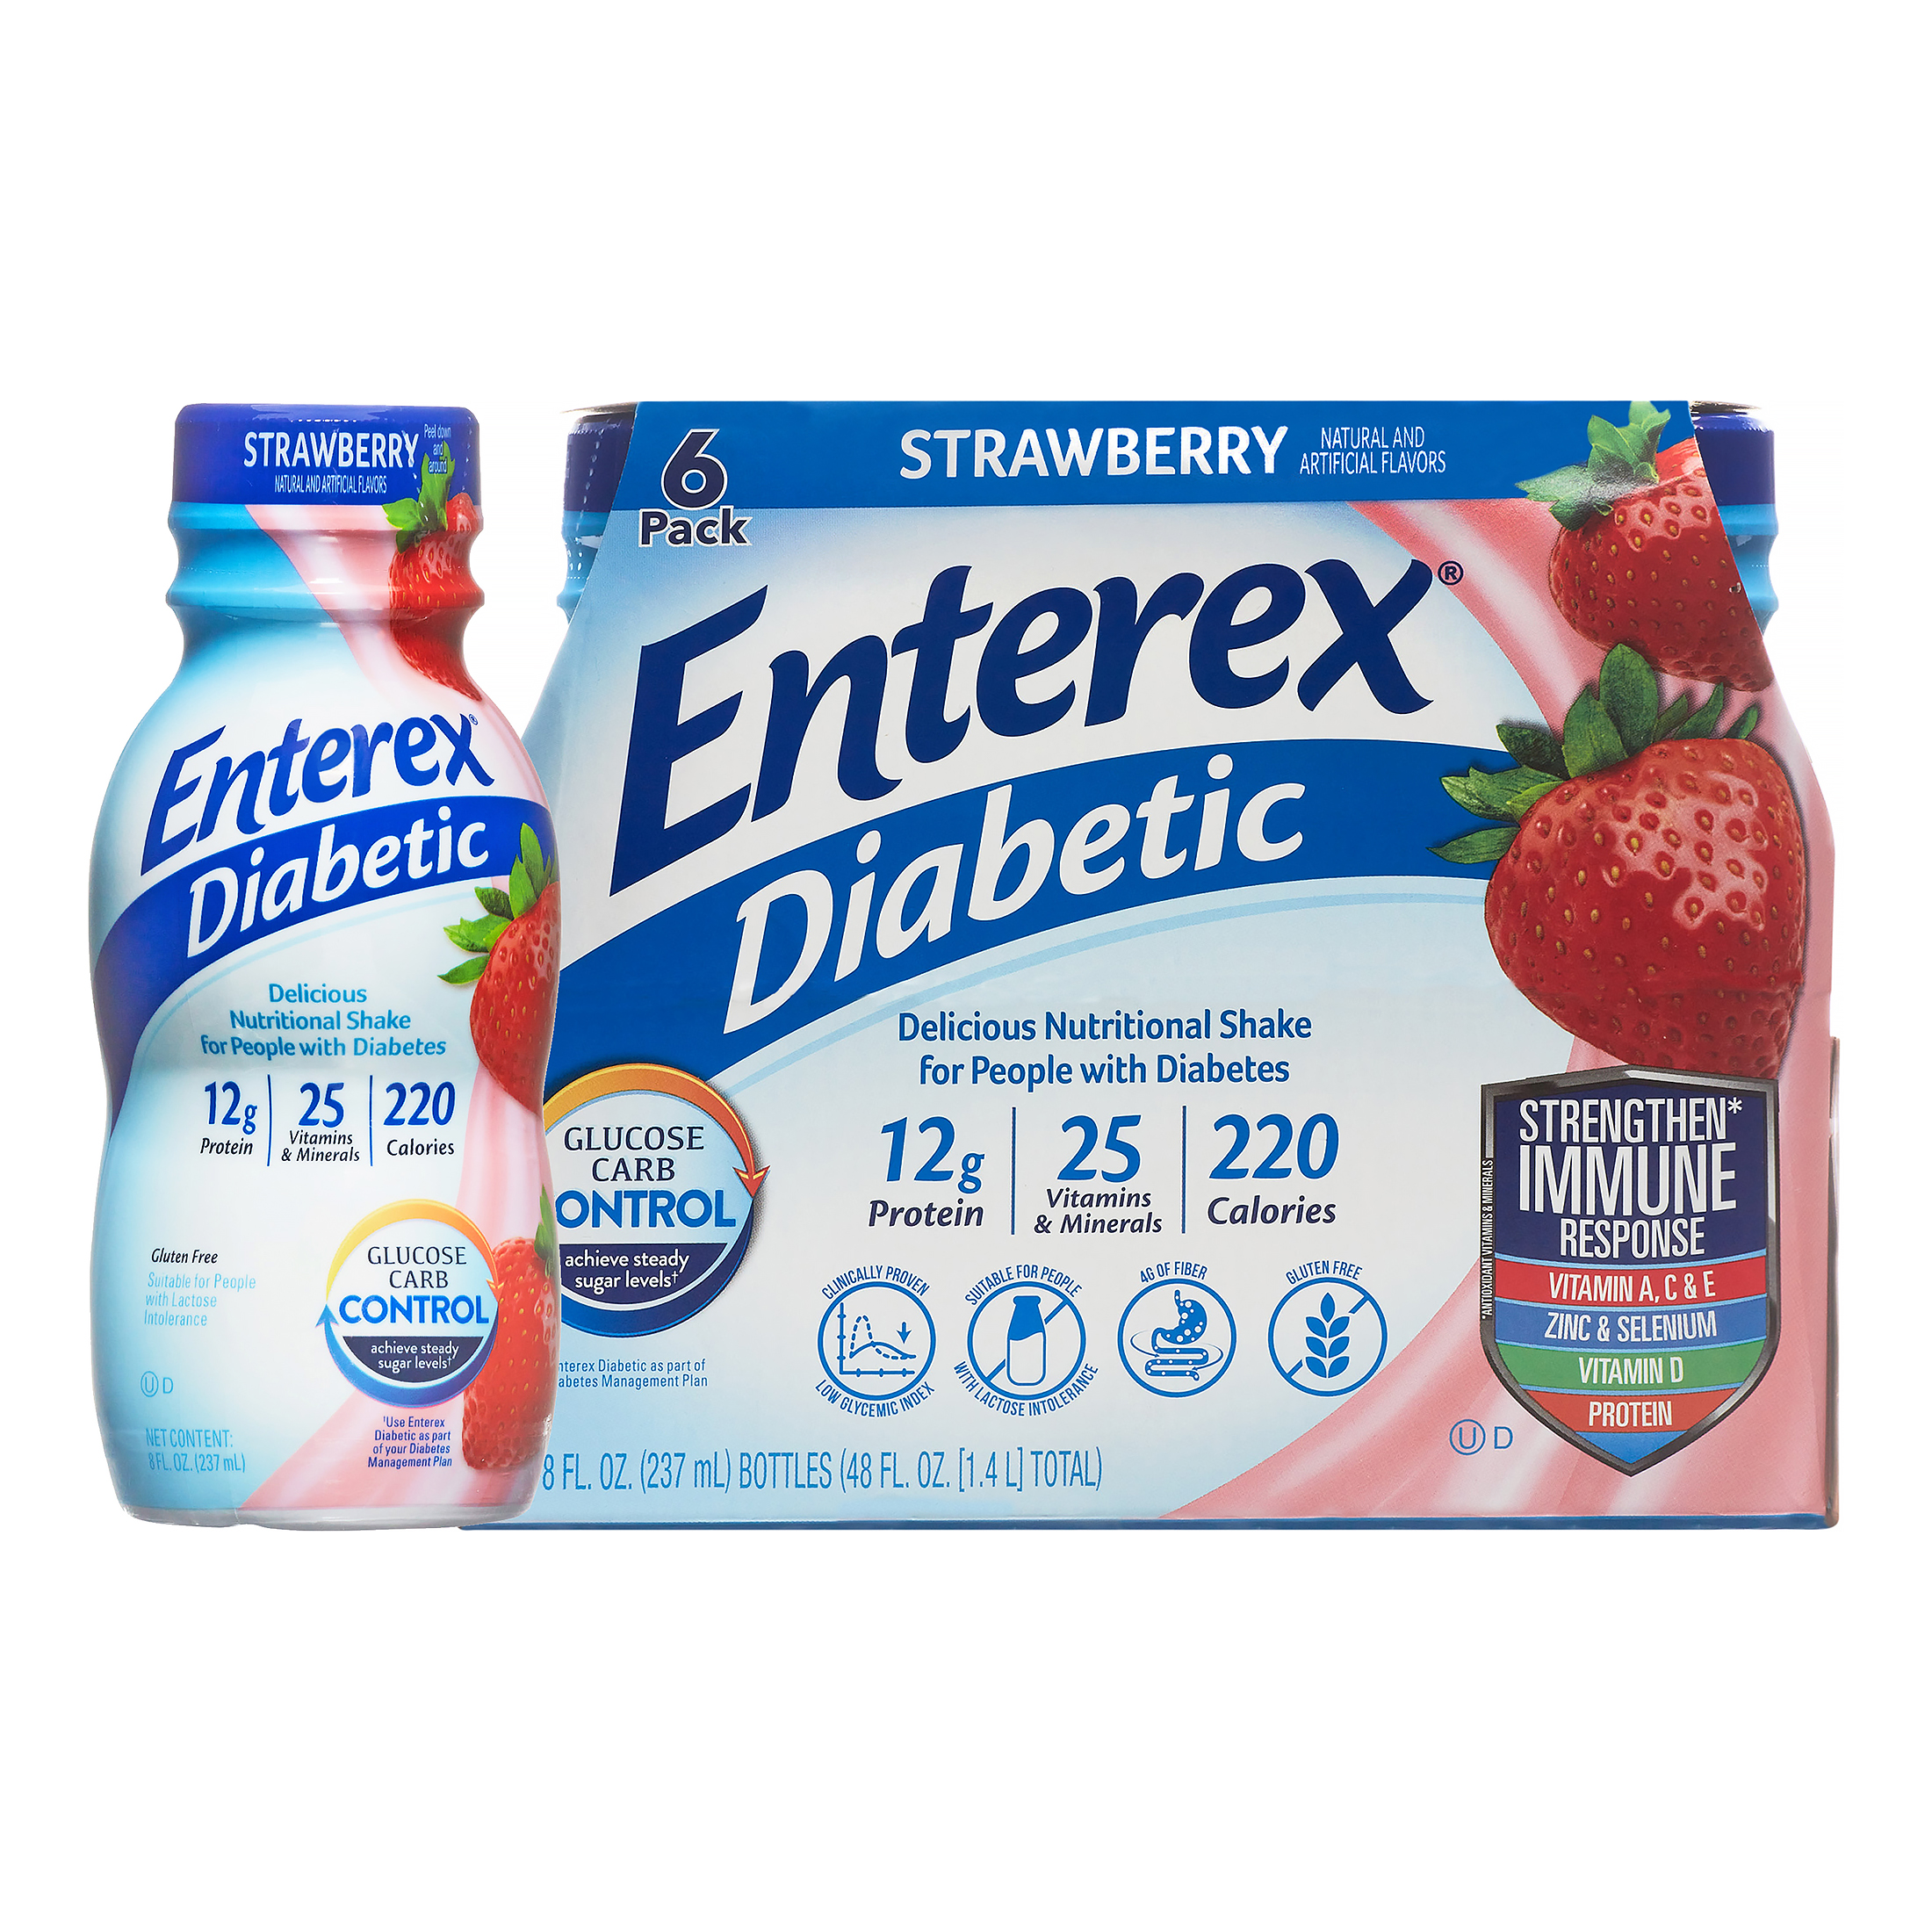 Enterex Diabetic Nutritional Meal Replacement Shake,For People with Diabetes,Strawberry , 8 fl oz, 6 Pack - image 1 of 9